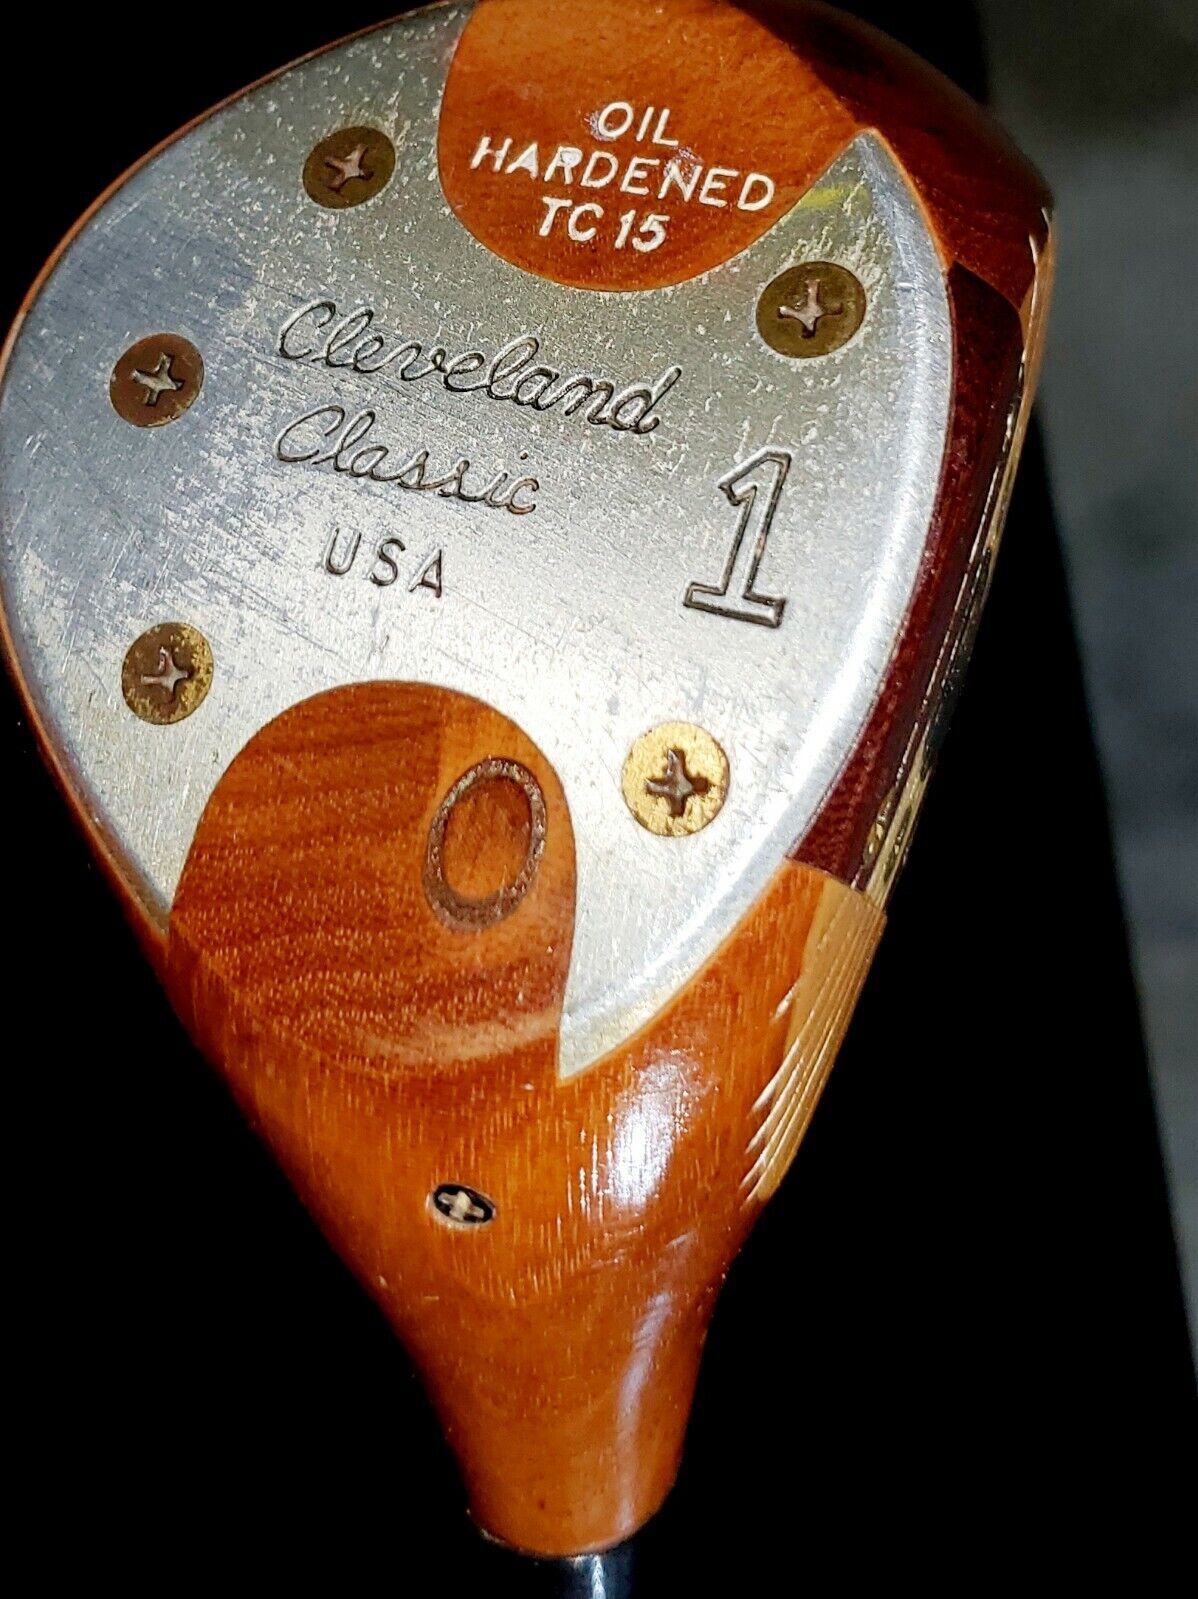 Cleveland Classic TC 15 Oil Hardened Persimmon Driver Dynamic Gold R300 Shaft